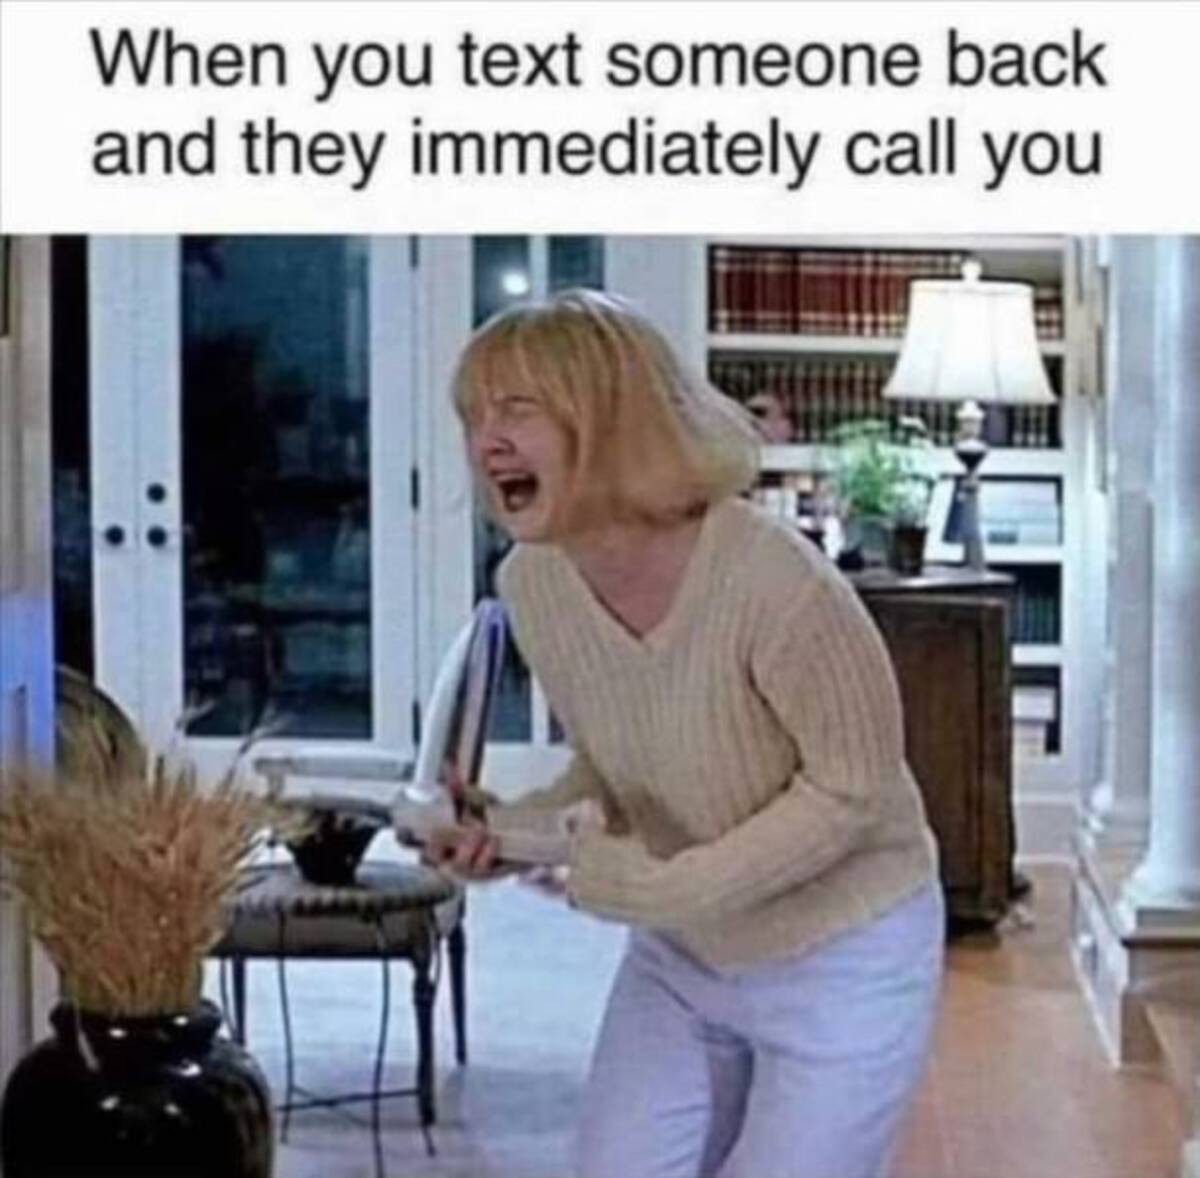 hate phone calls - When you text someone back and they immediately call you